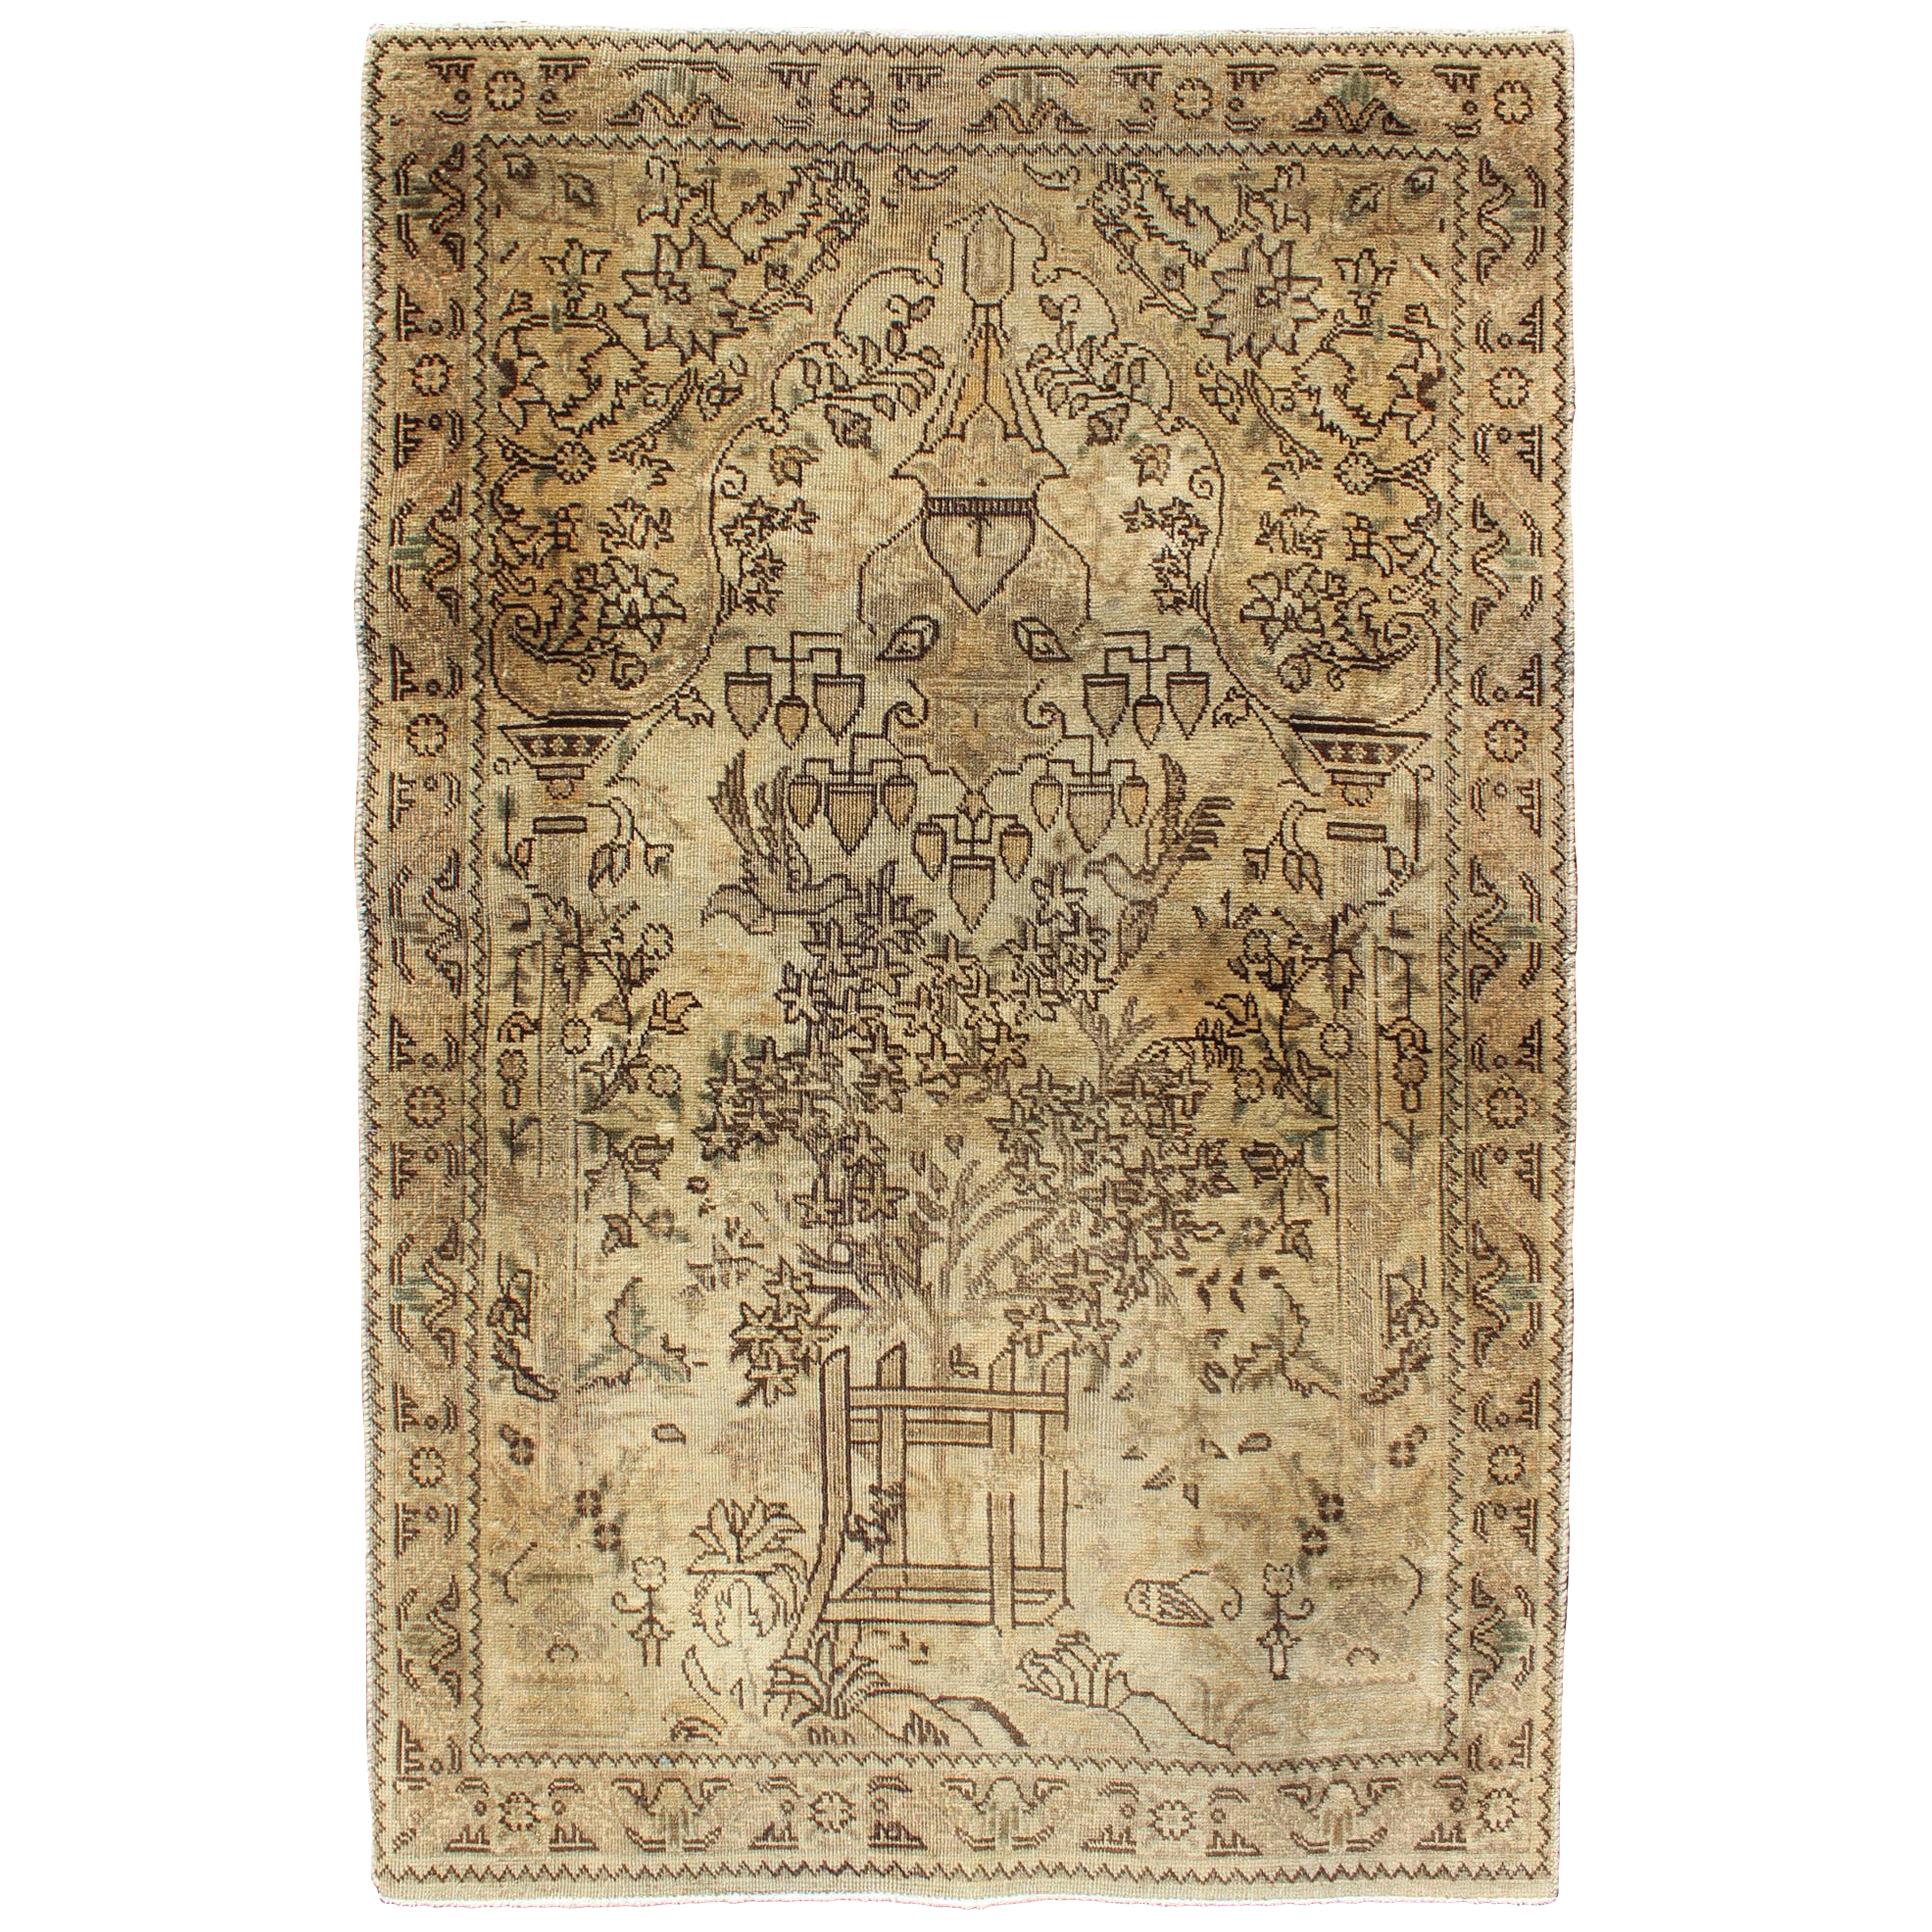 Neutral Tone Vintage Persian Lilihan Rug with Ornate Garden Center Field